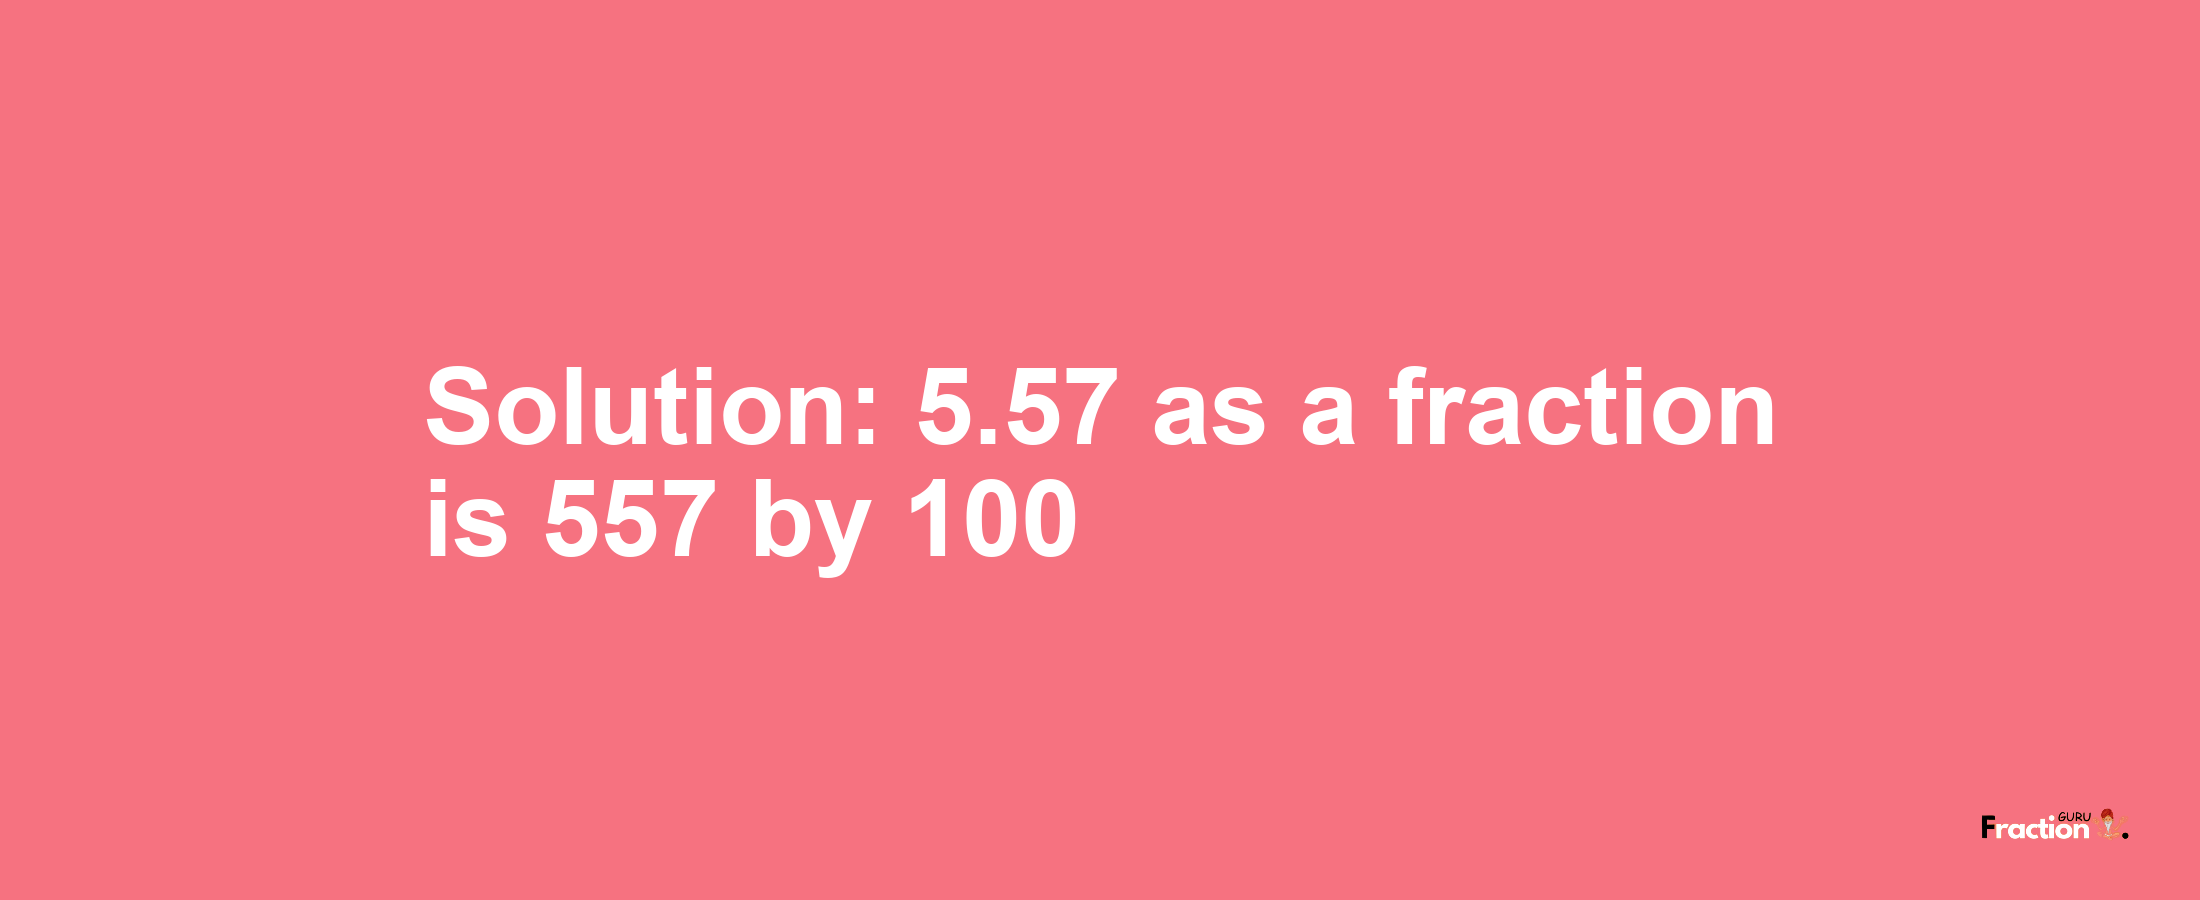 Solution:5.57 as a fraction is 557/100